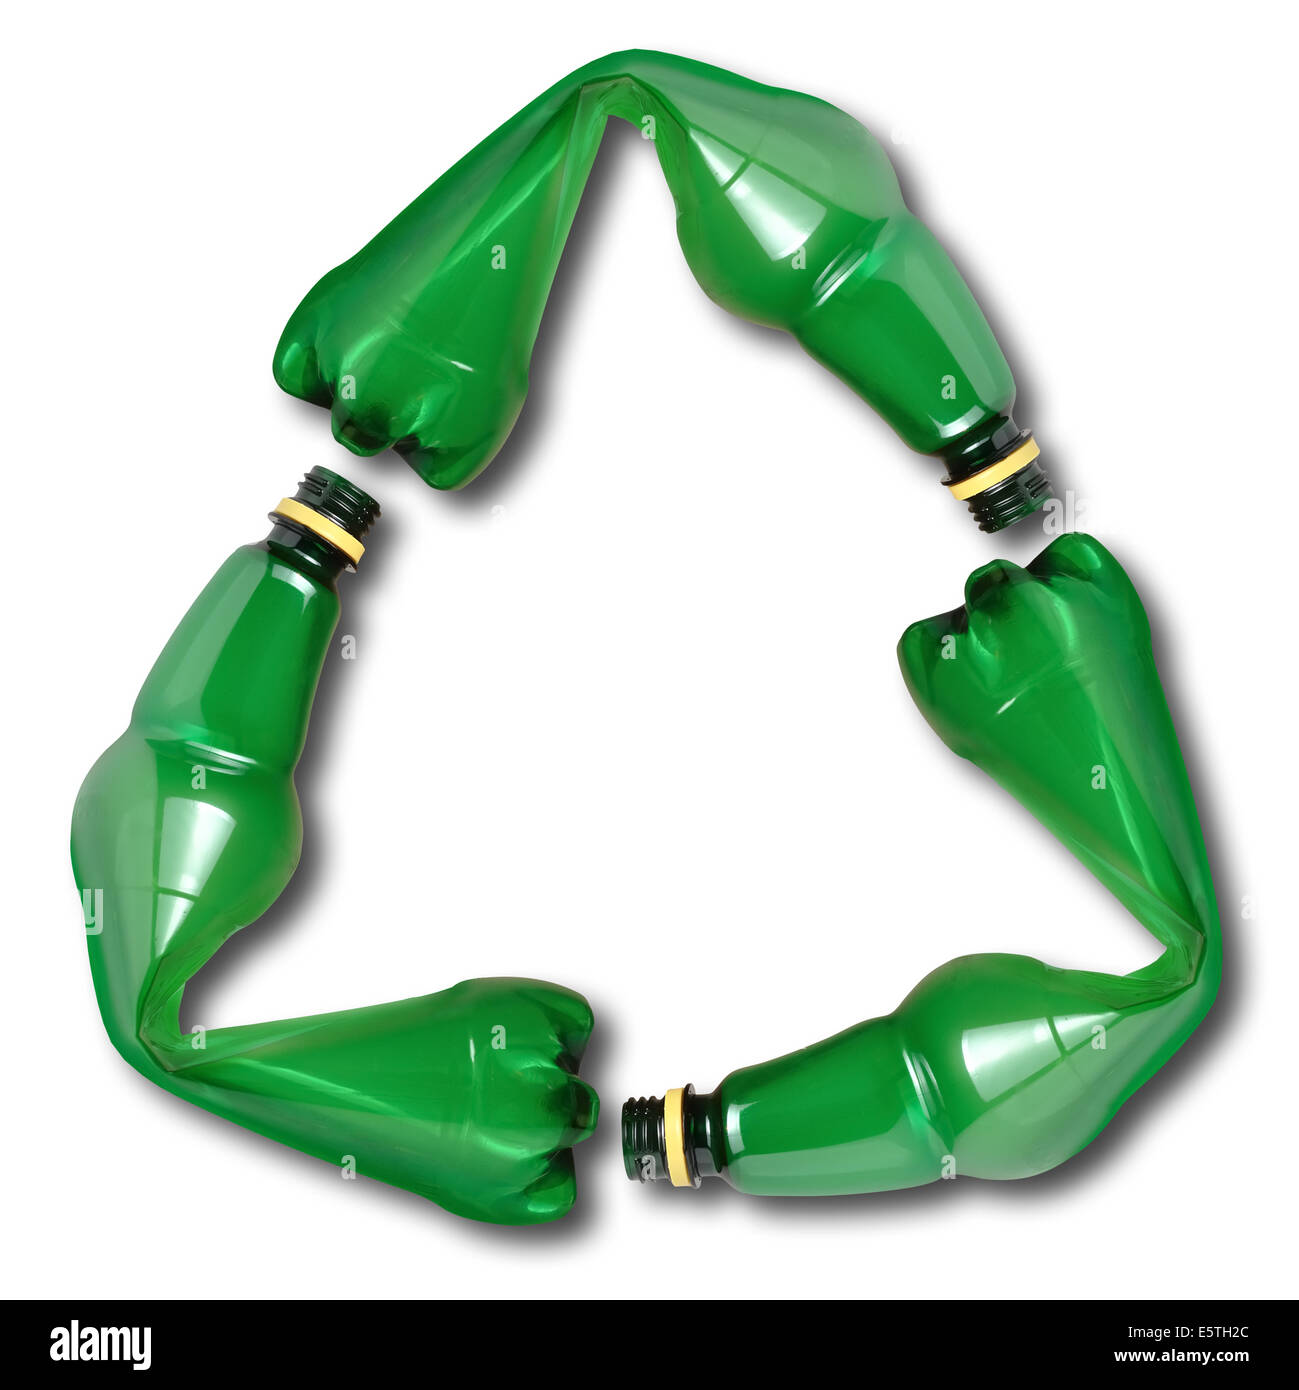 Recycle symbol made of used plastic bottles Stock Photo